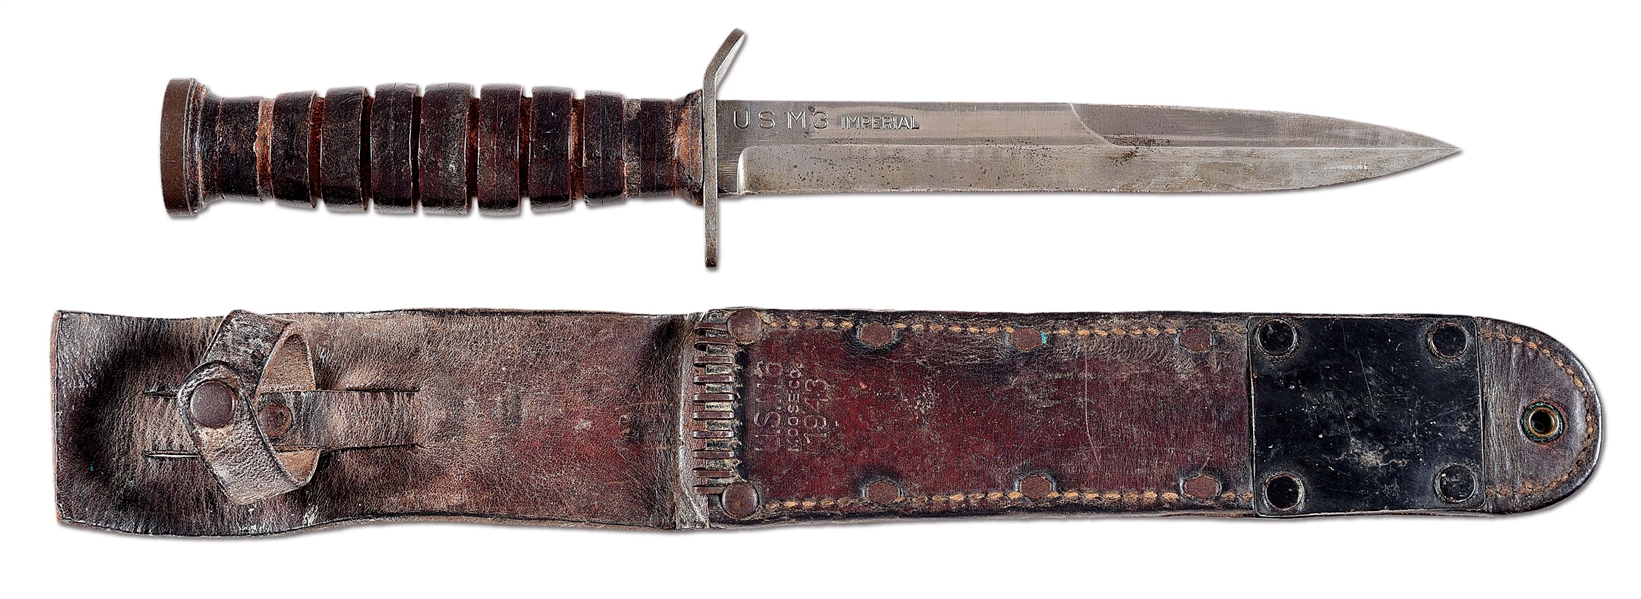 WORLD WAR II ERA IMPERIAL M3 TRENCH KNIFE, BLADE MARKED WITH CORRECT M6 SCABBARD.